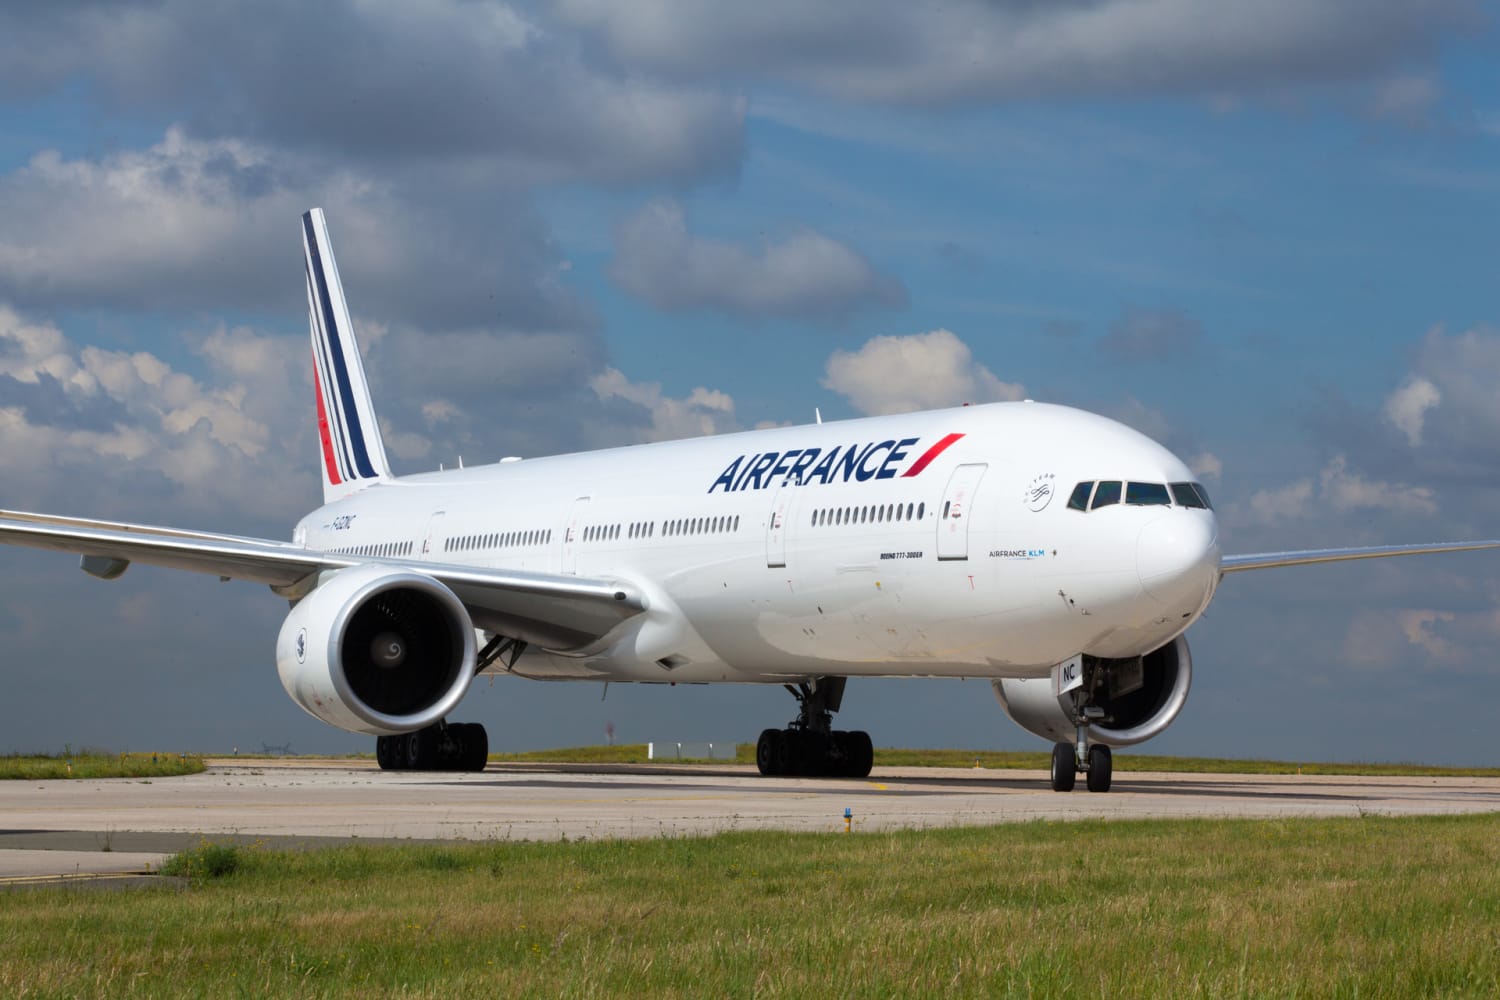 Fly with Air France to experience top-notch services on the sky